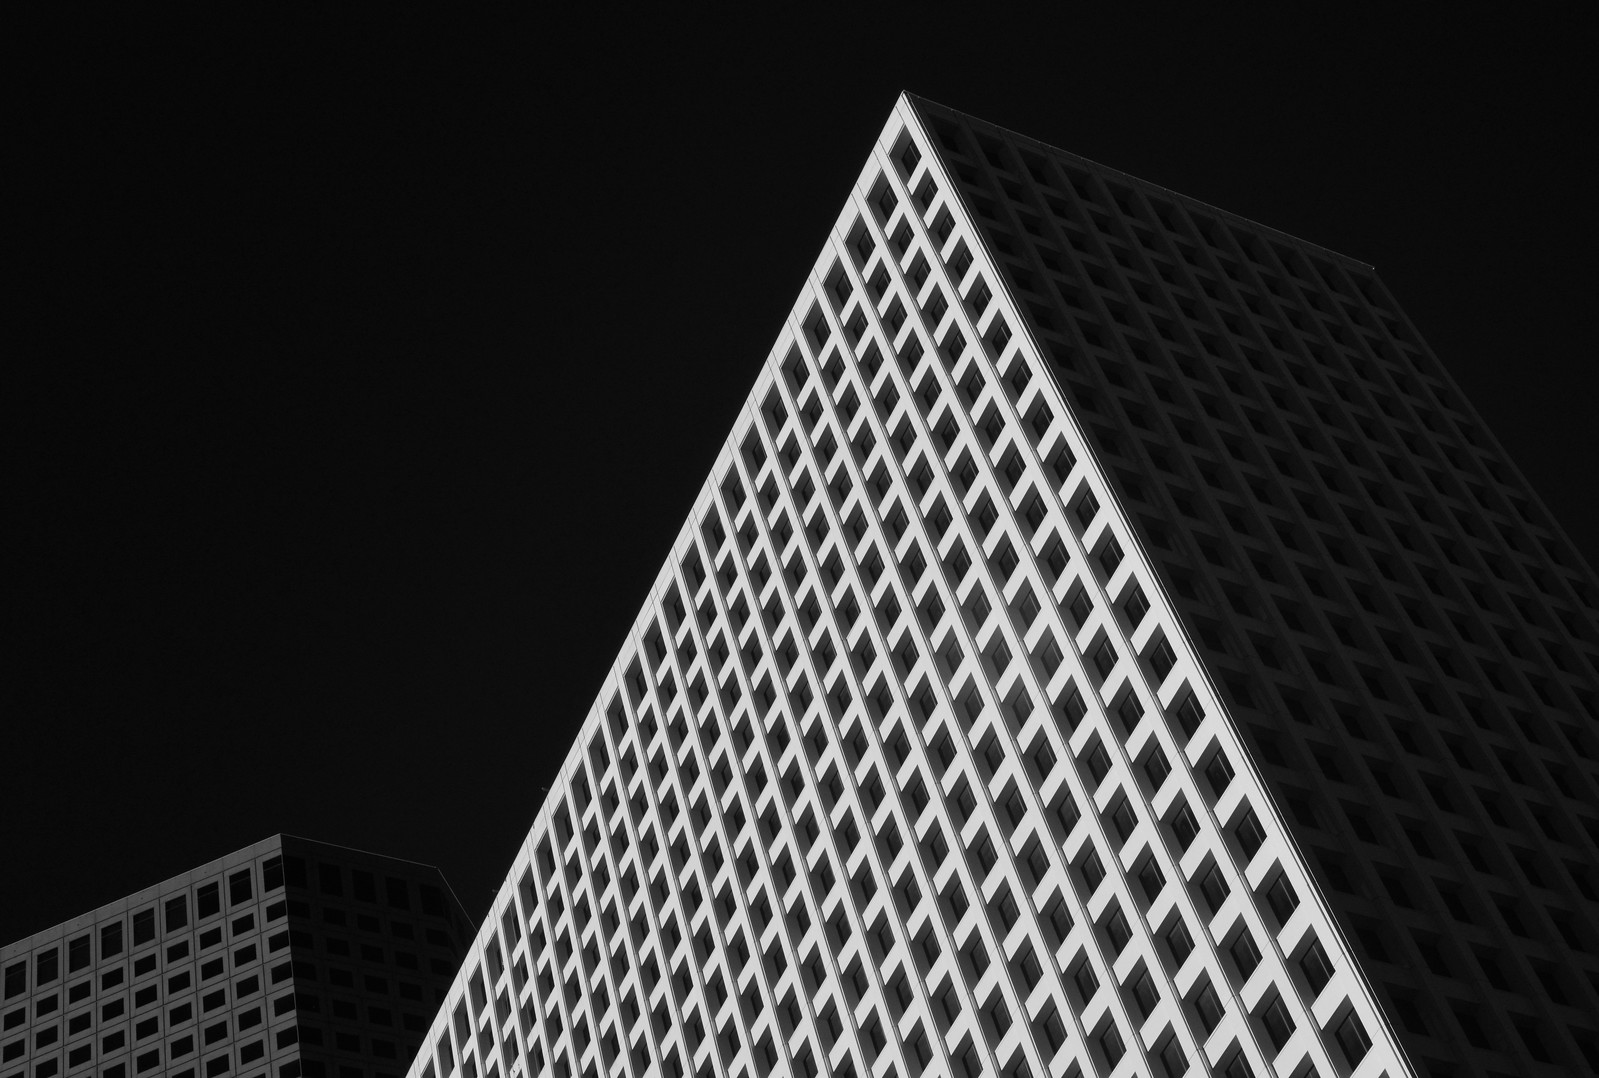 Geometry in downtown Houston (infrared)